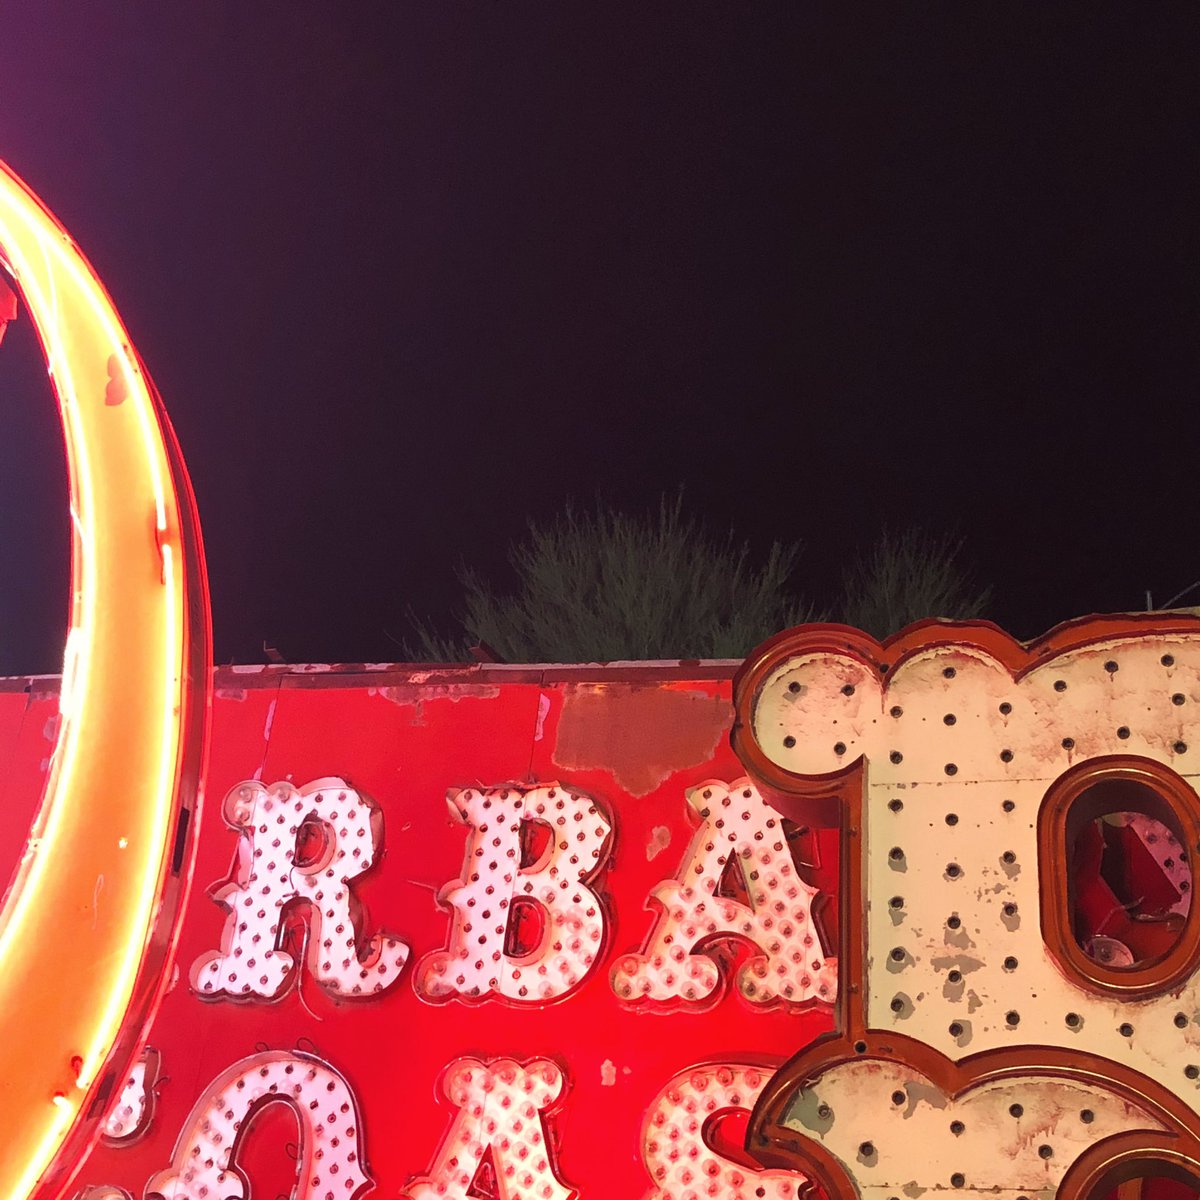 Our graphic designers made the most out of the #signexpo and went on the @isasigns tour of the Neon Museum! Our team was inspired by the combination of art, history and technology in this space. #neonmuseum #designinspiration #lasvegas